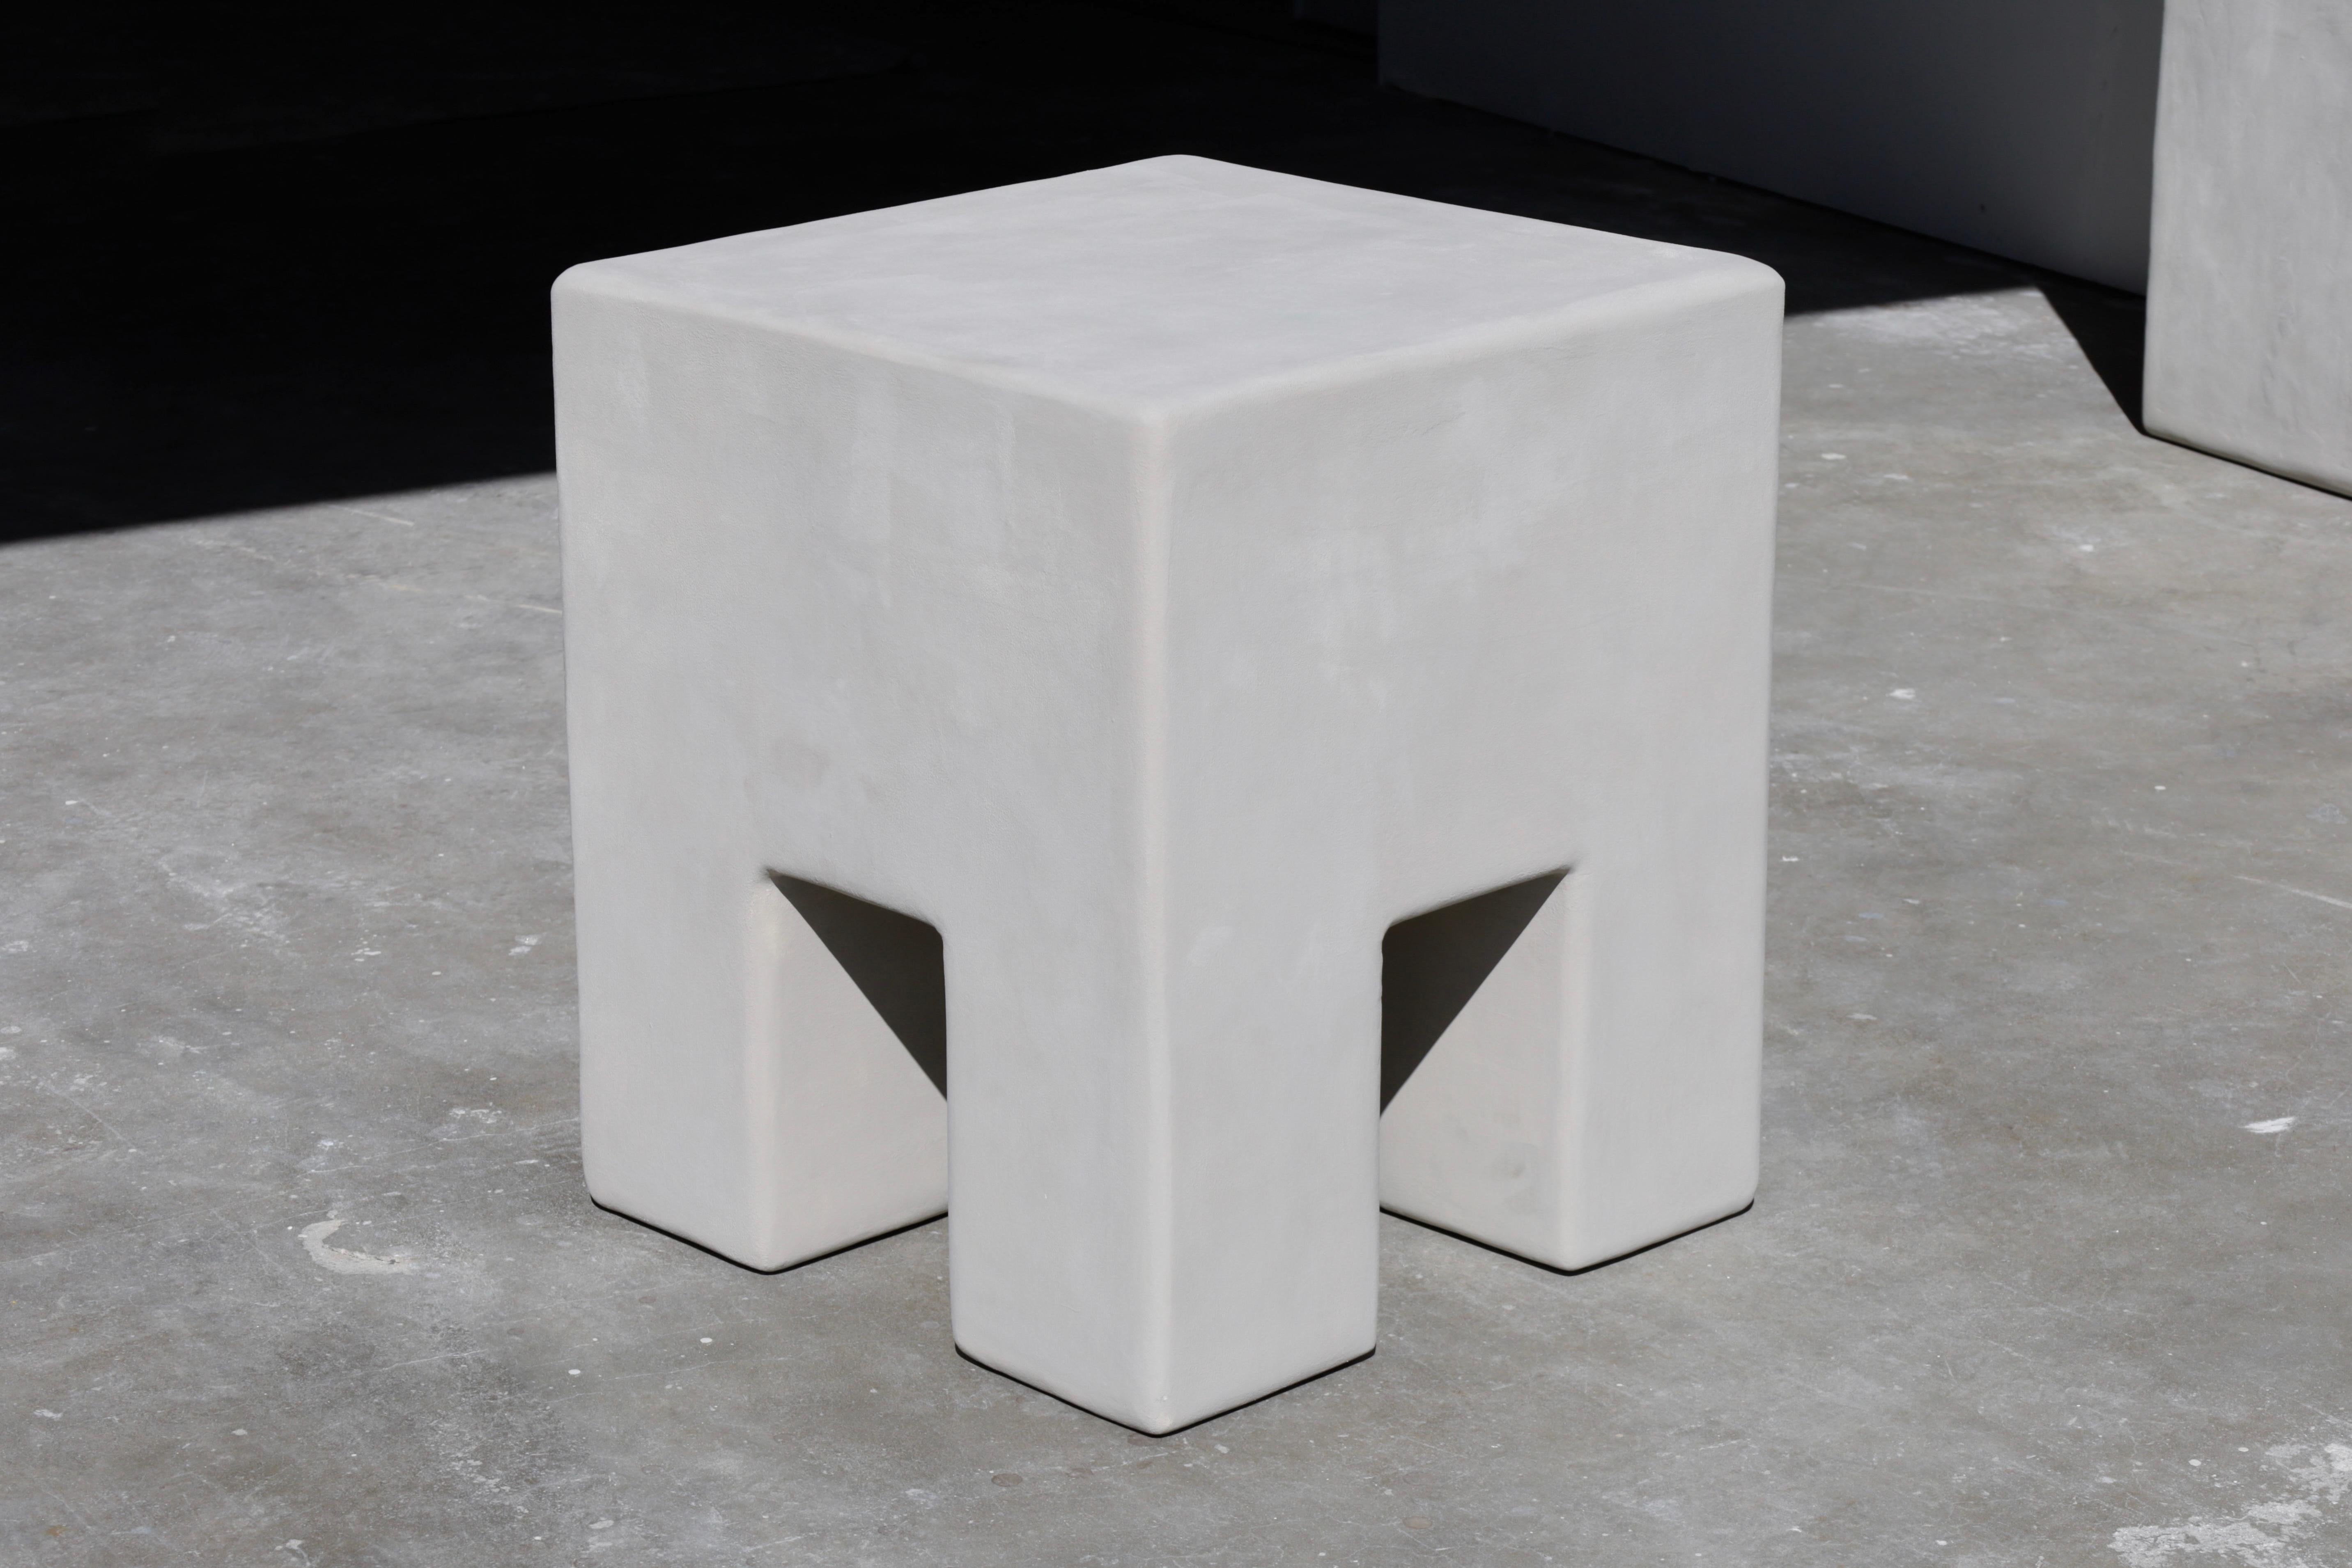 tate sits comfortably in multiple spaces within the home. he is suited as a bedside table, an end table alongside a sofa or as a sculptural accent piece in hallways or other parts of the home.

our product is one-of-a-kind. no two are exactly